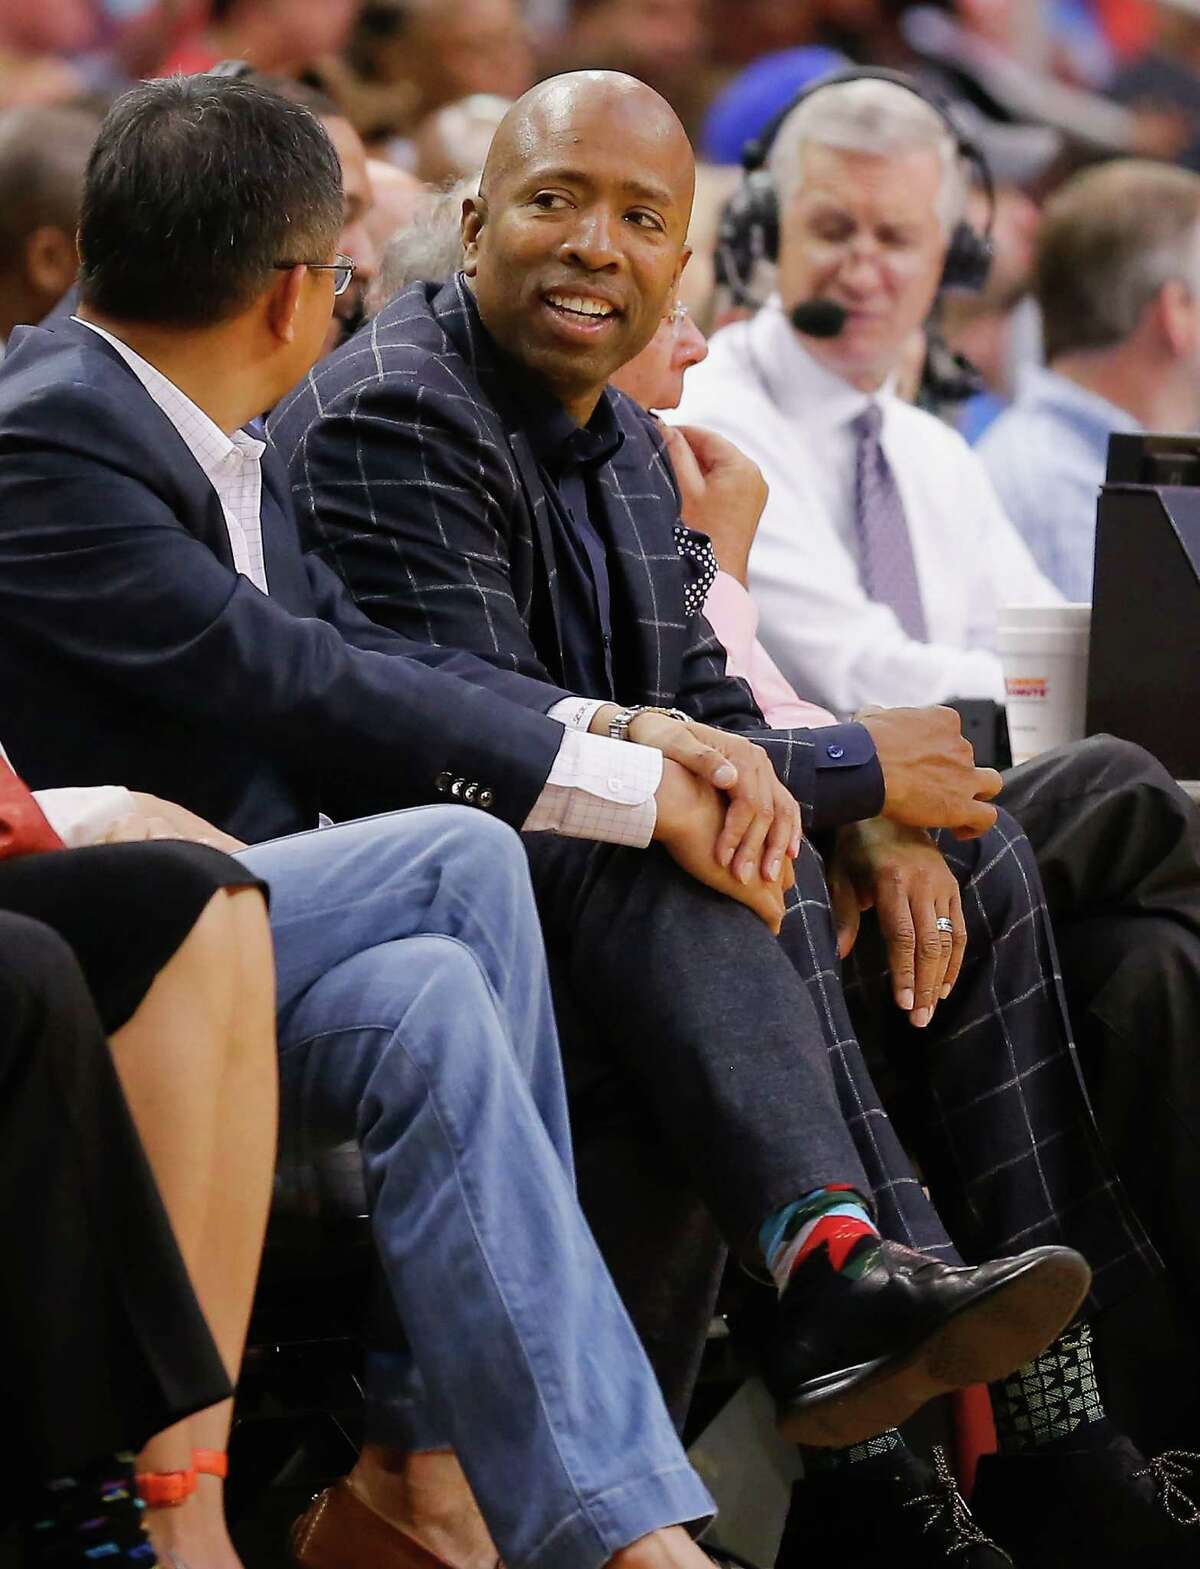 Kenny Smith interviewed for the open Houston Rockets job last week.﻿ Browse through the photos to see some of the candidates for the job.